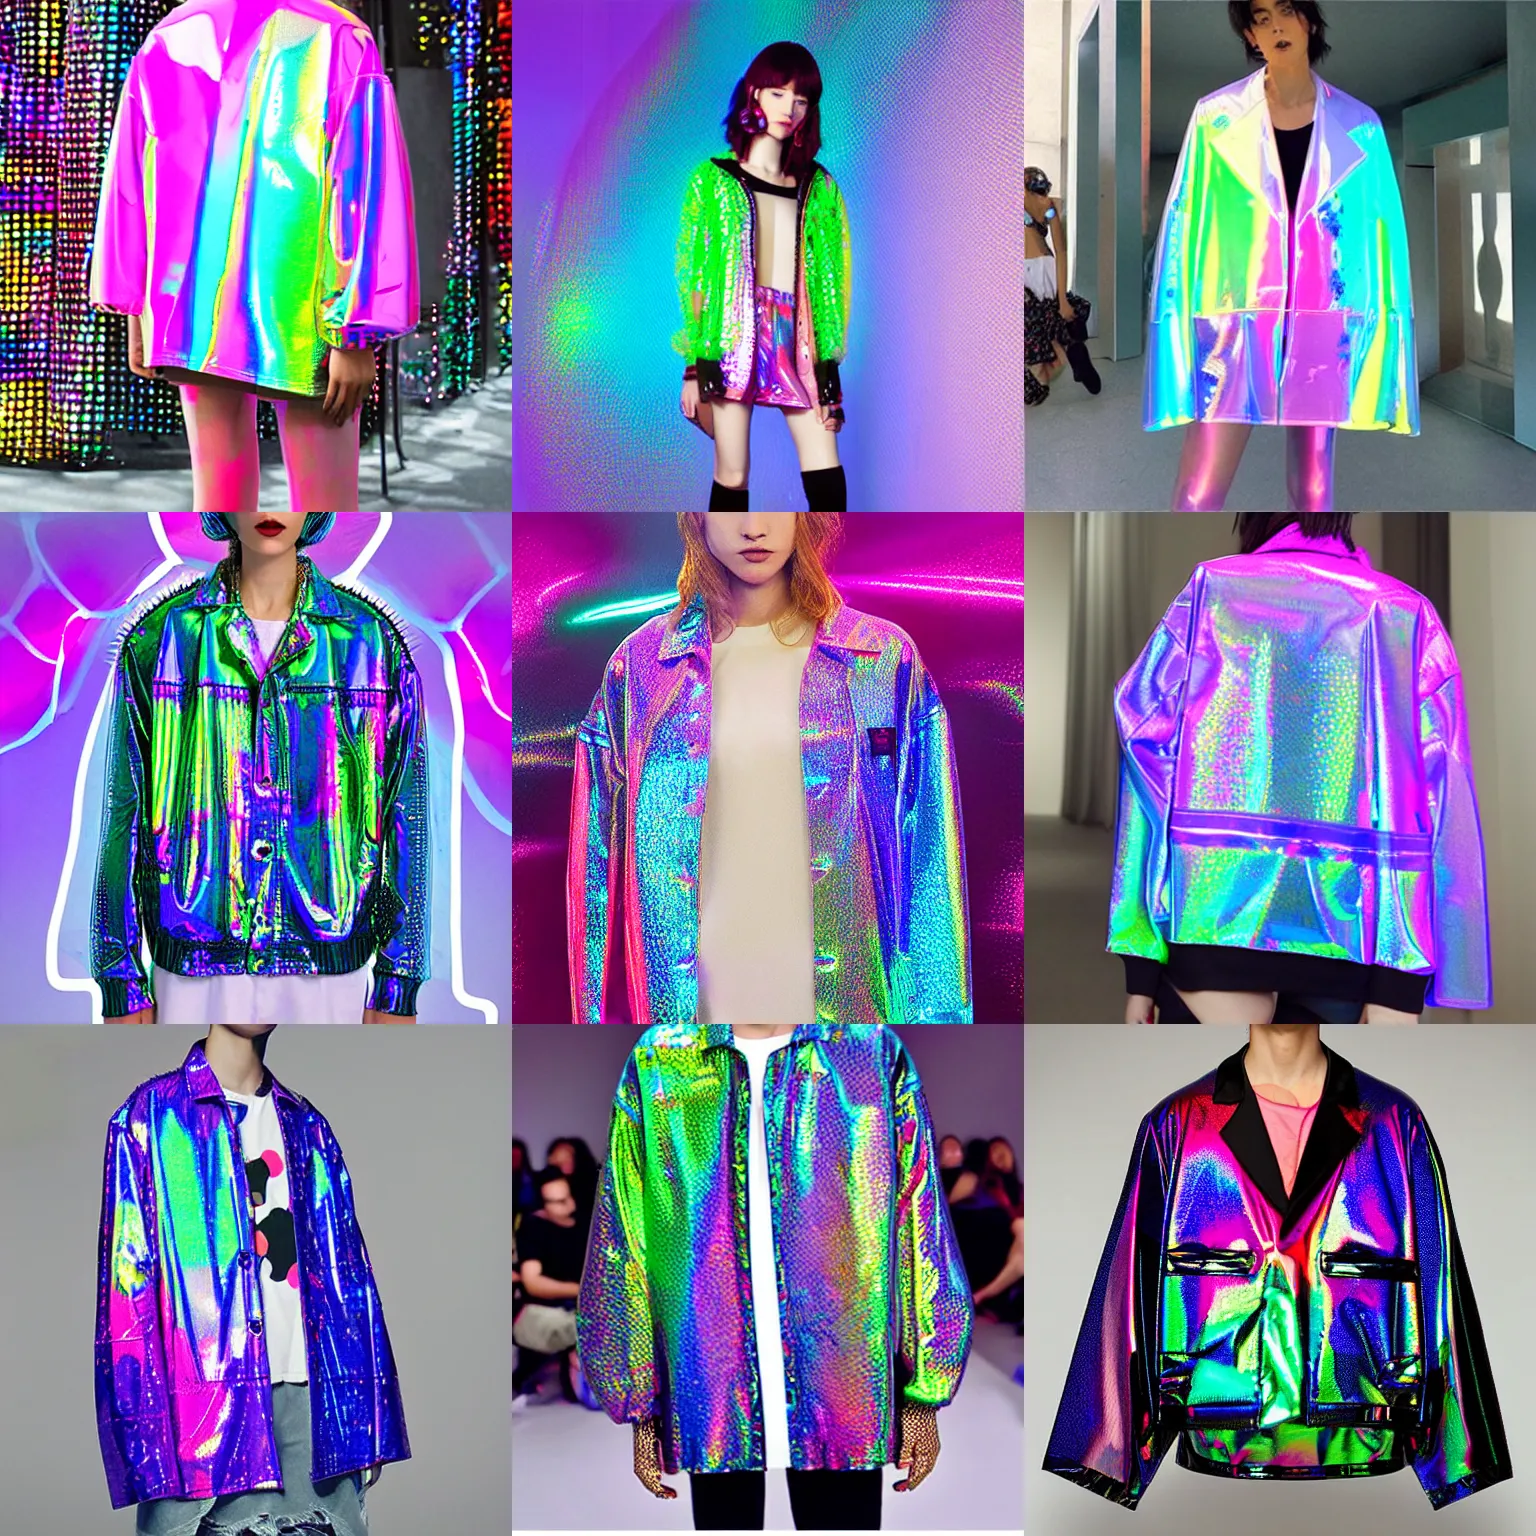 Prompt: a transparent holographic oversized jacket inspired by jawbreaker candy, vaporwave mall aesthetic, dots, netting, spikes, fashionable, trendy, colorful, high end fashion